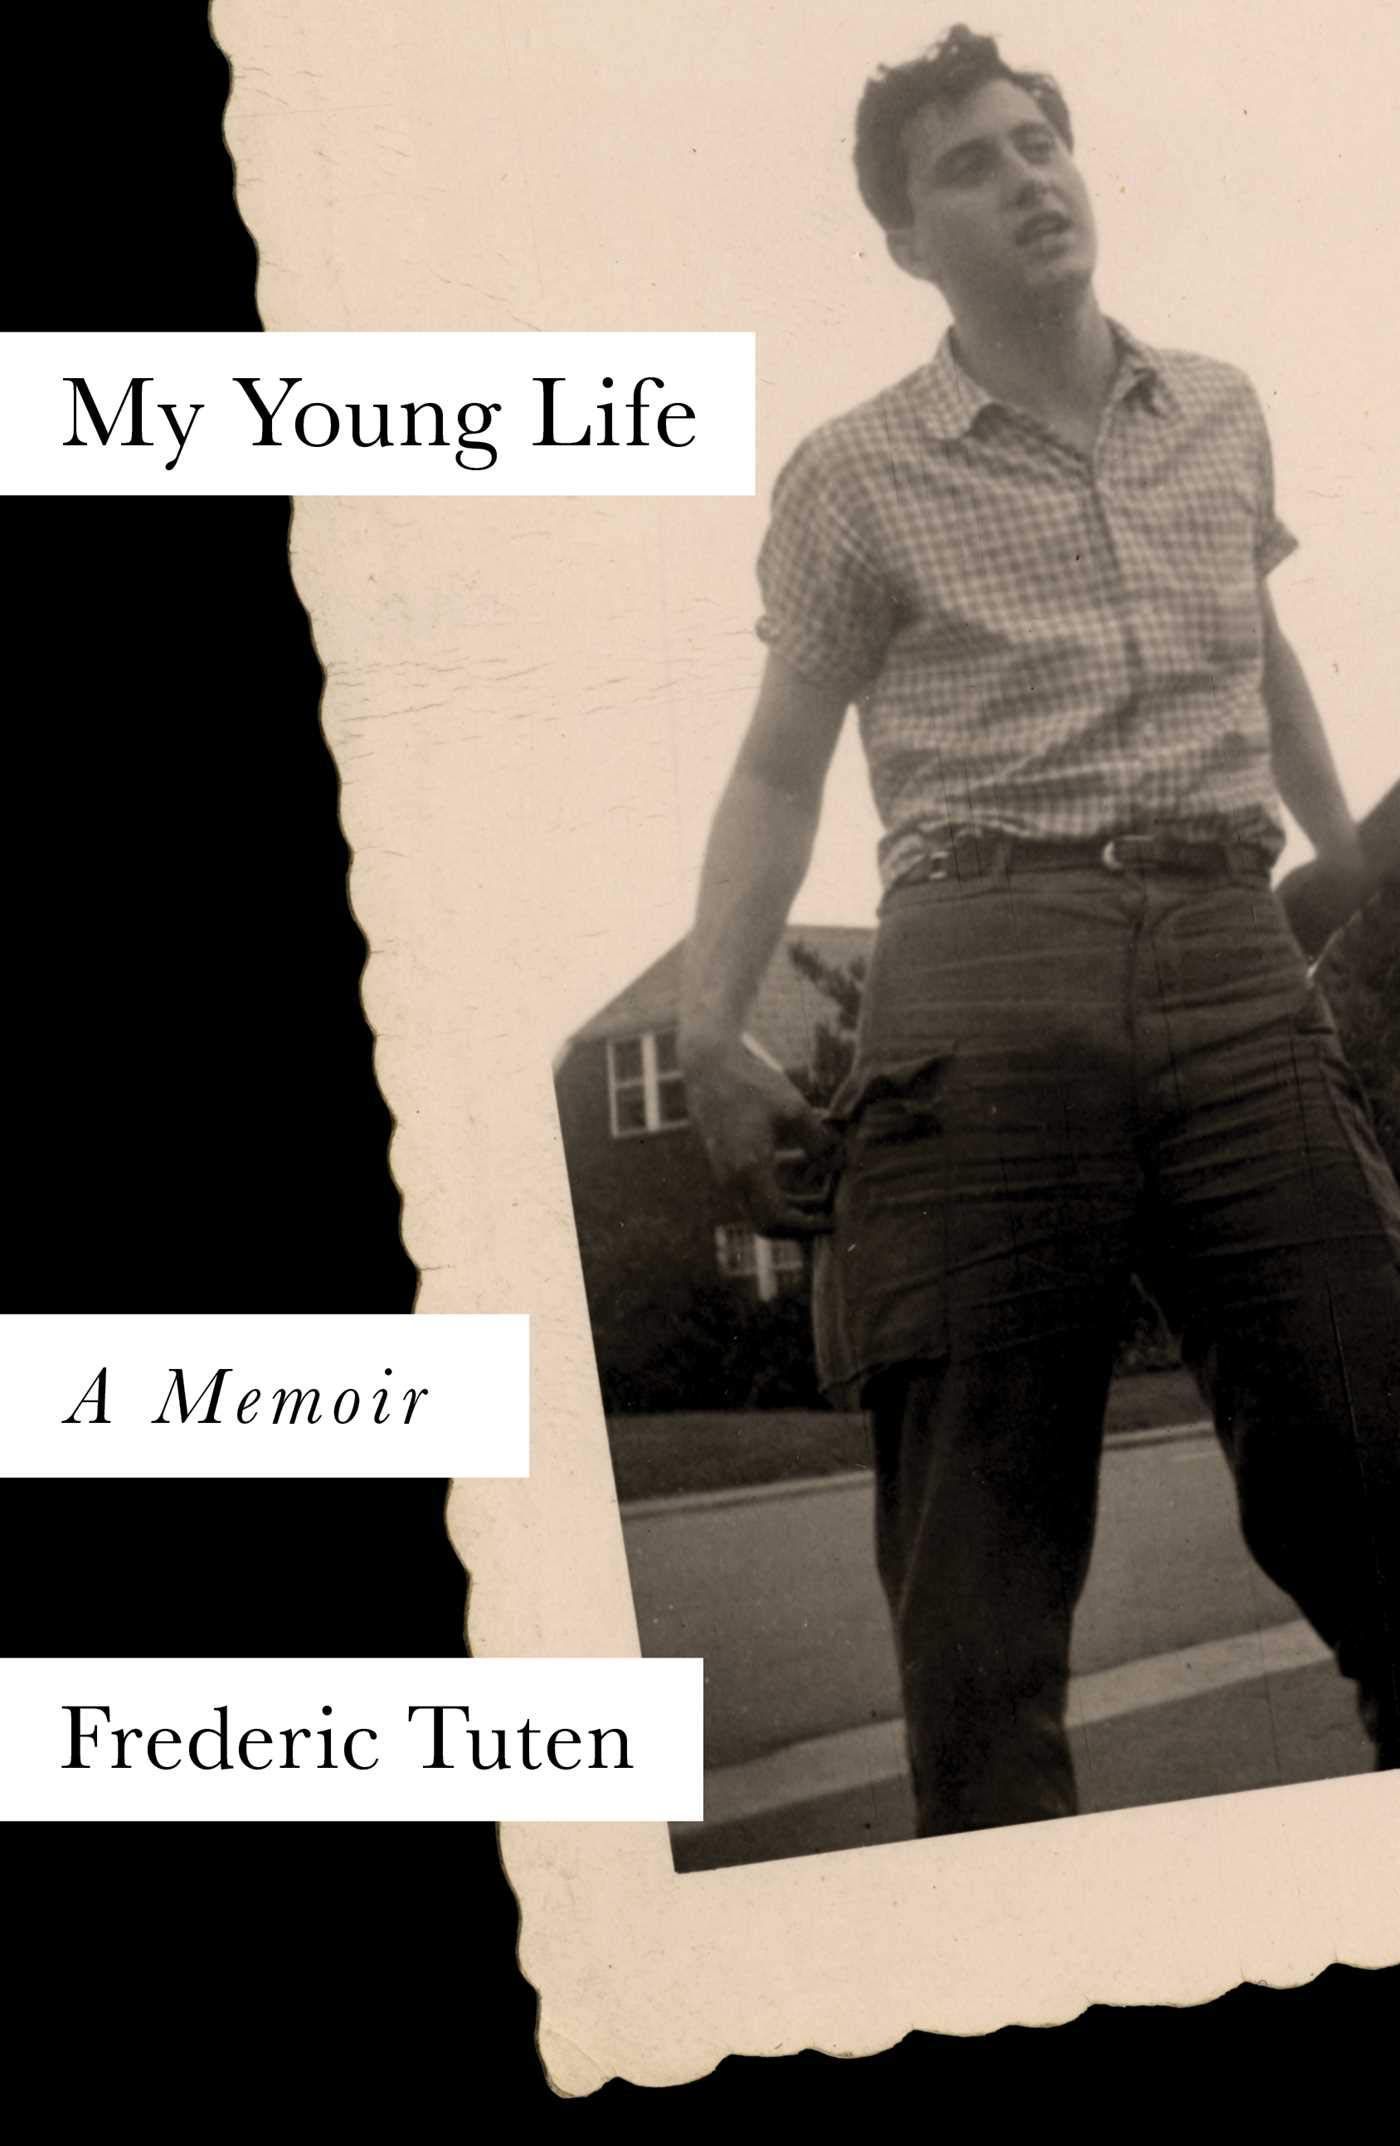 Freddie Outside the Bronx: Frederic Tuten’s “My Young Life”